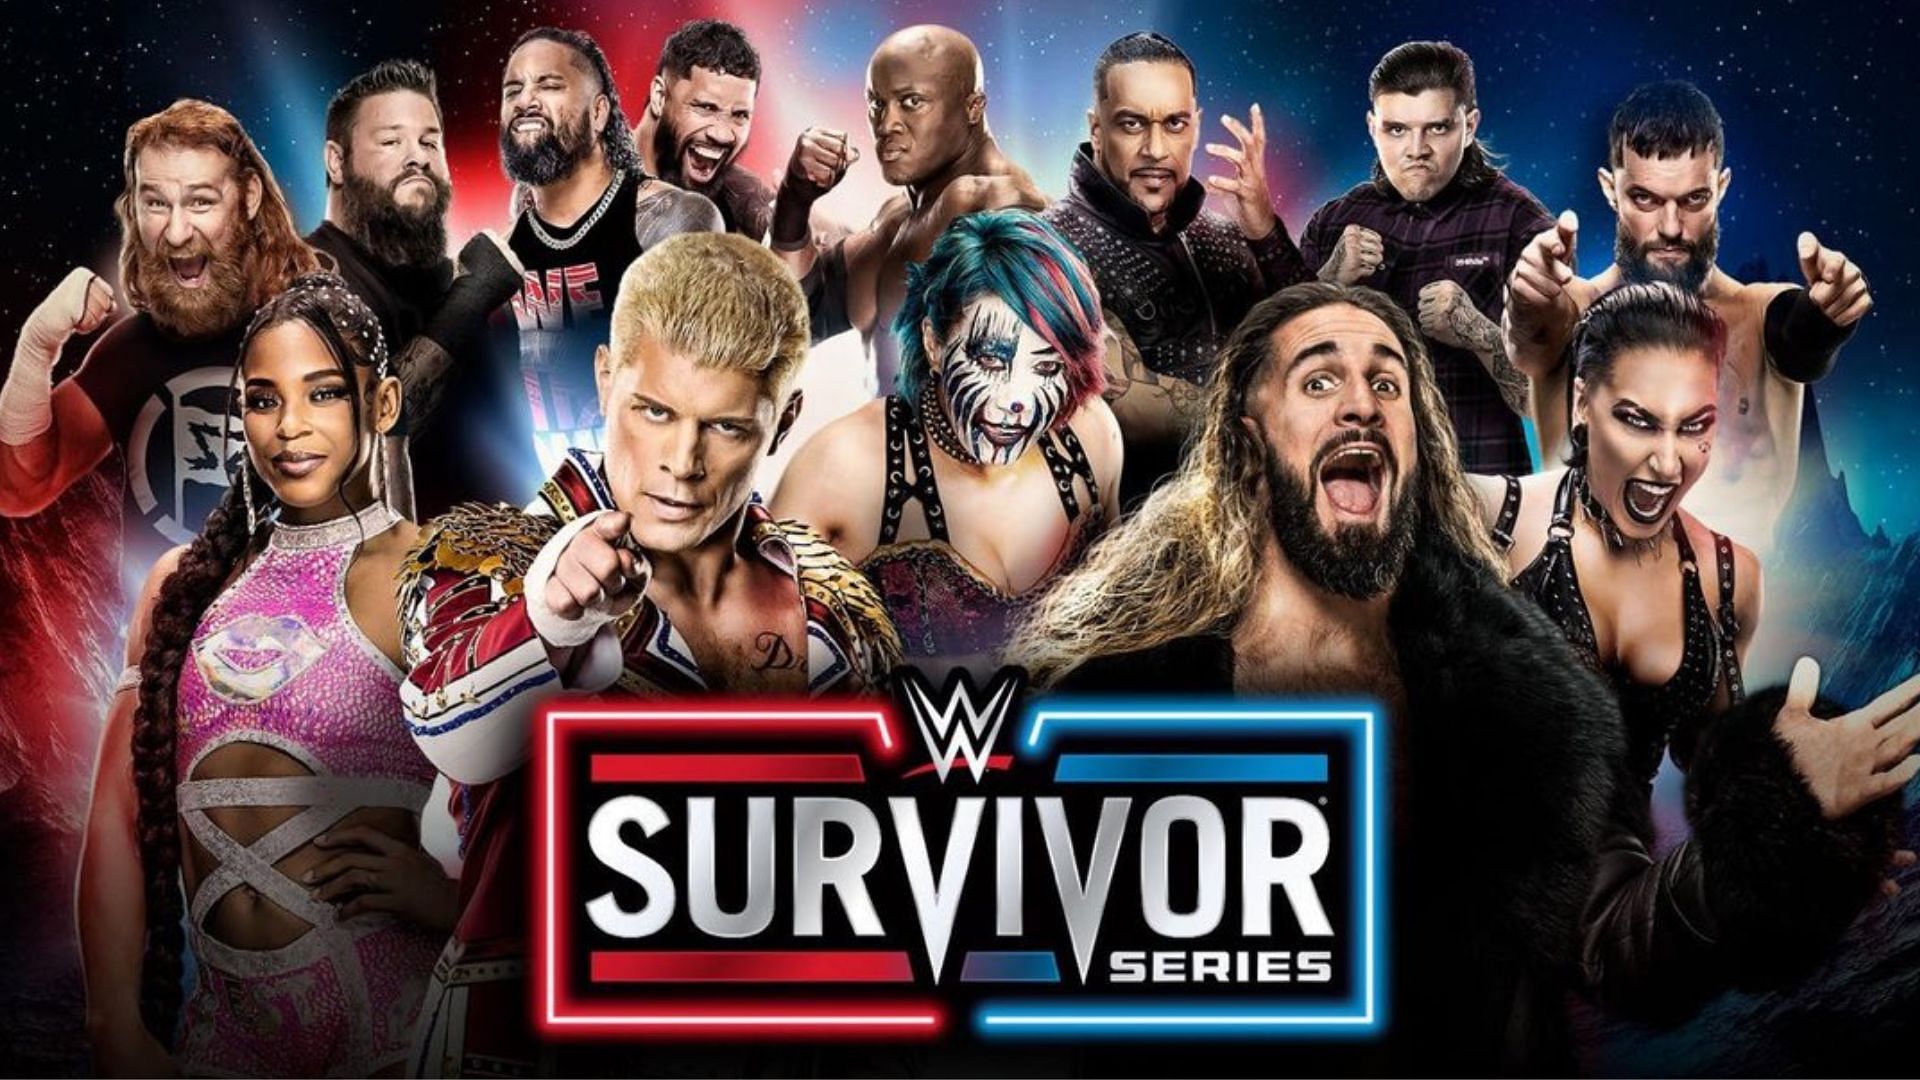 Did SmackDown tease potential leaders for a Survivor Series WarGames